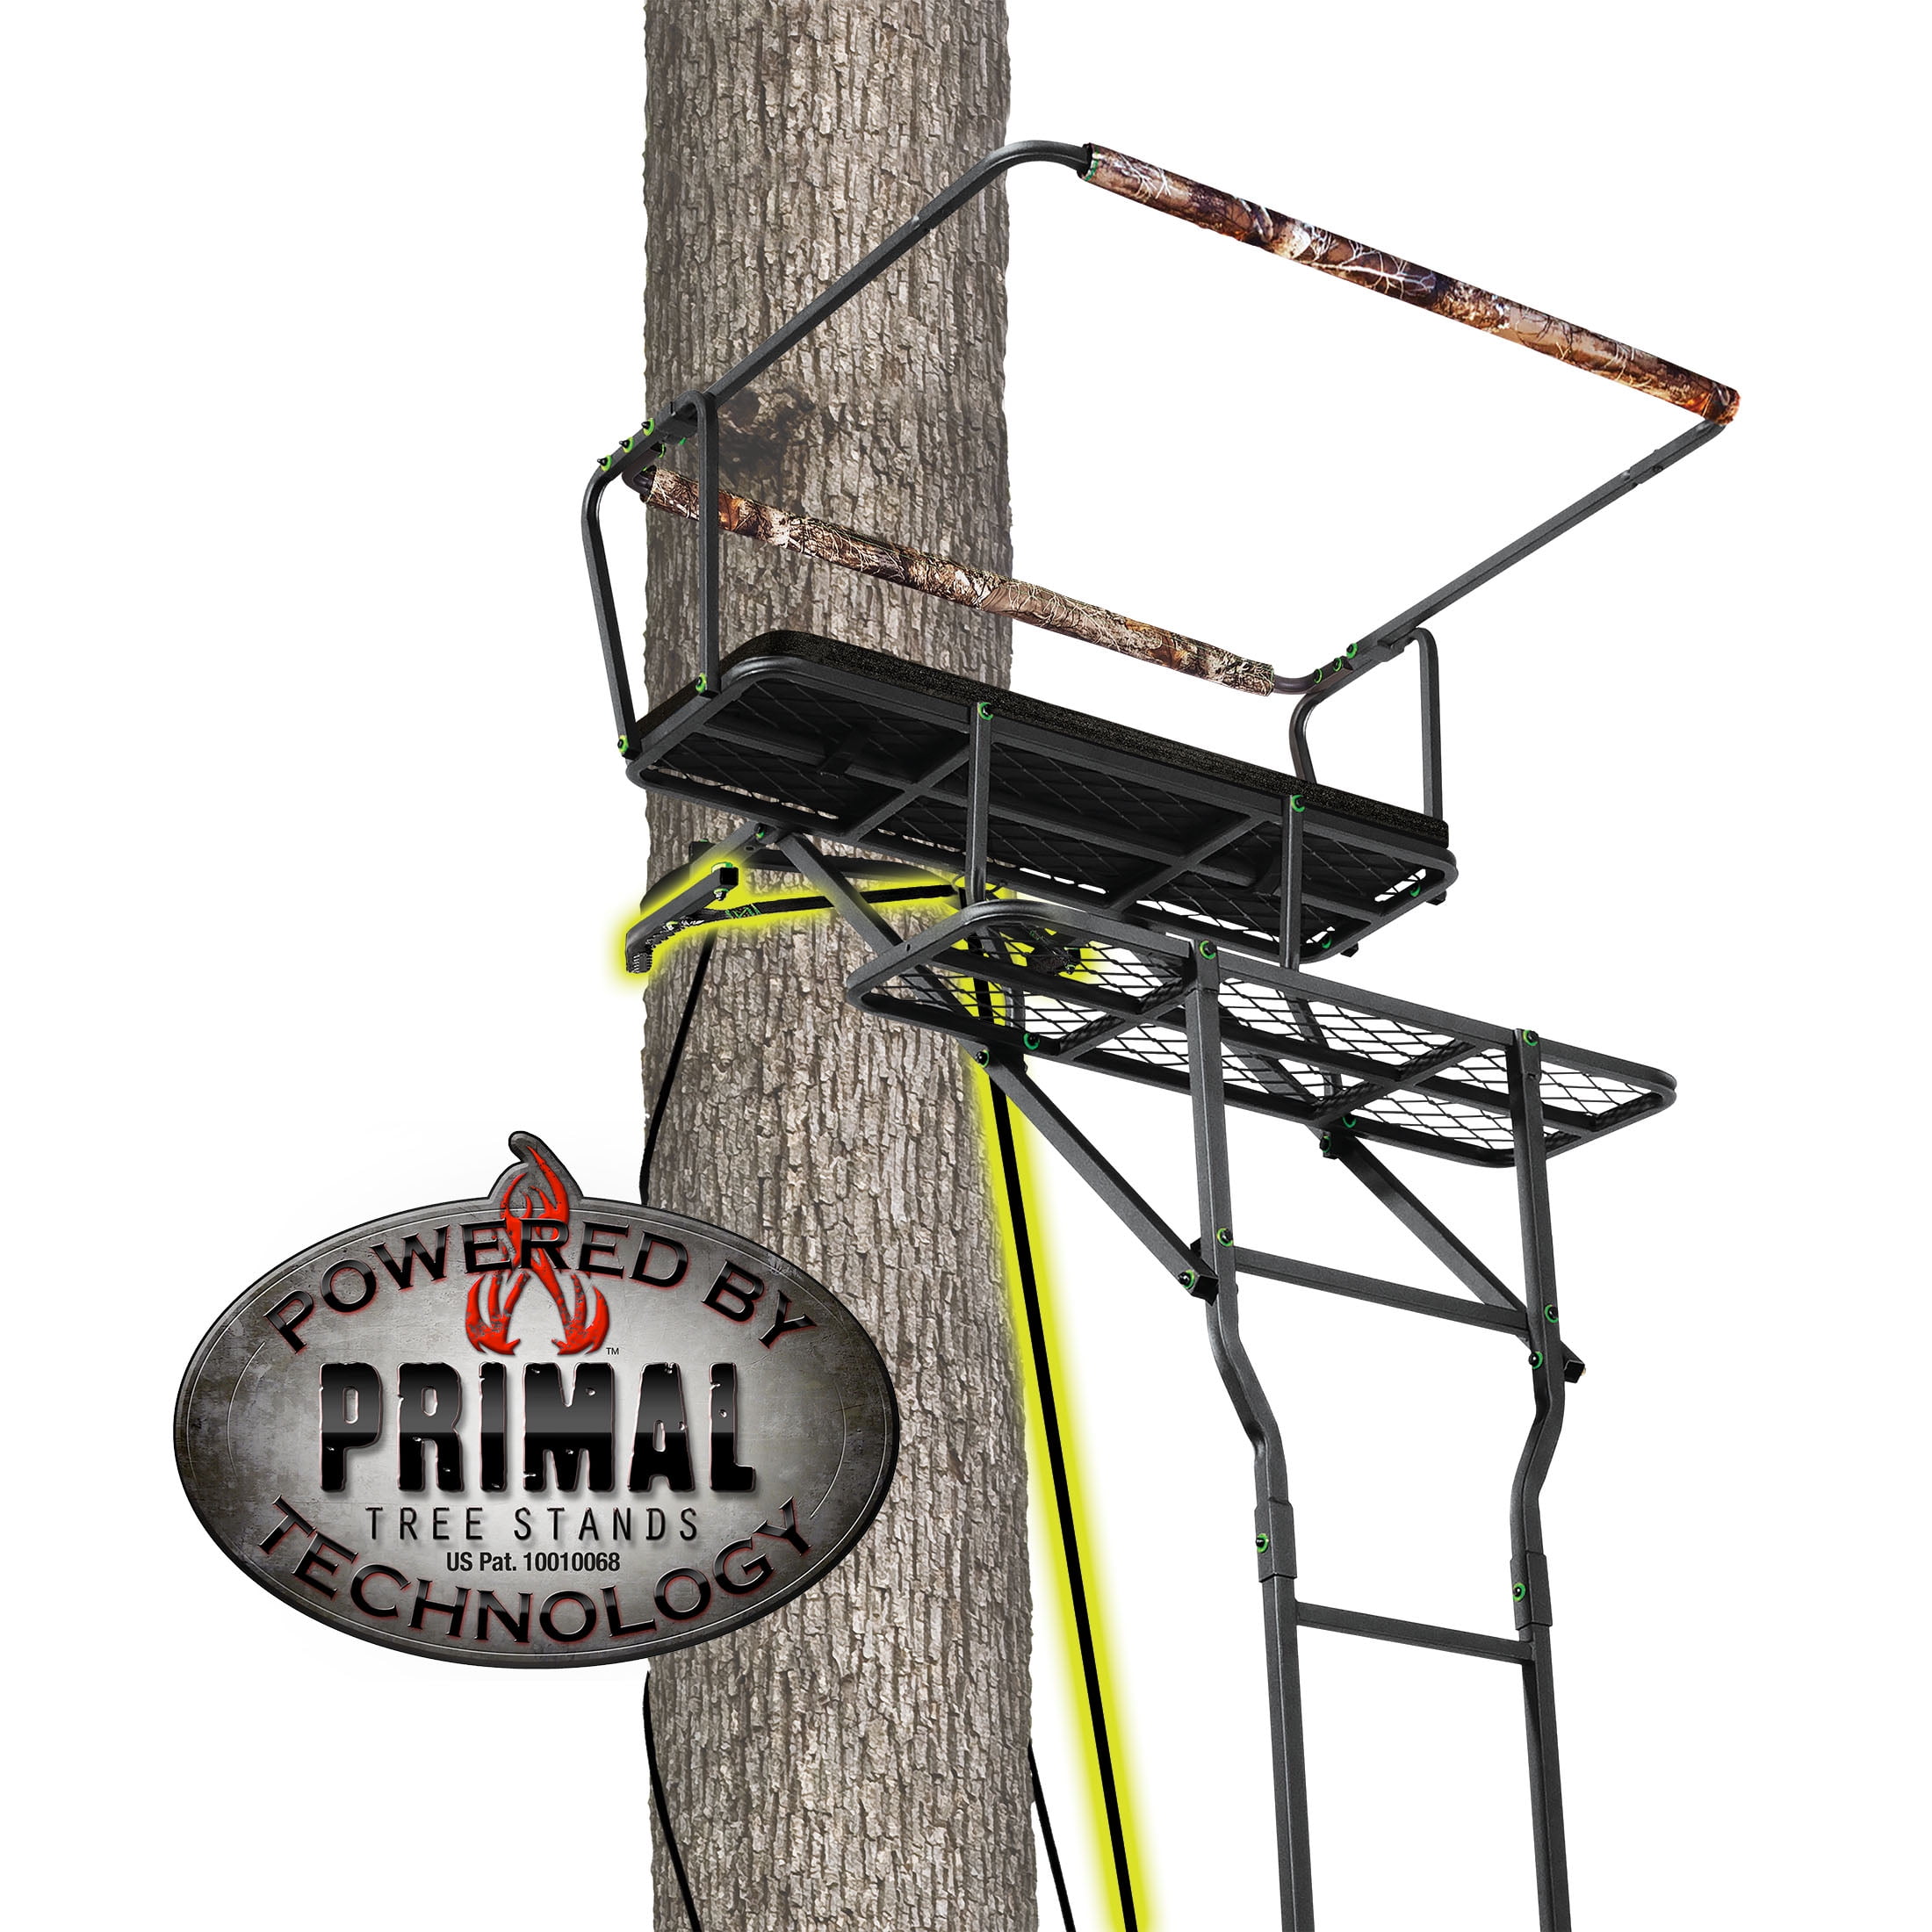 Realtree 15' Air Strike Two-Person Hunting Ladder Tree Stand W/Jaw 